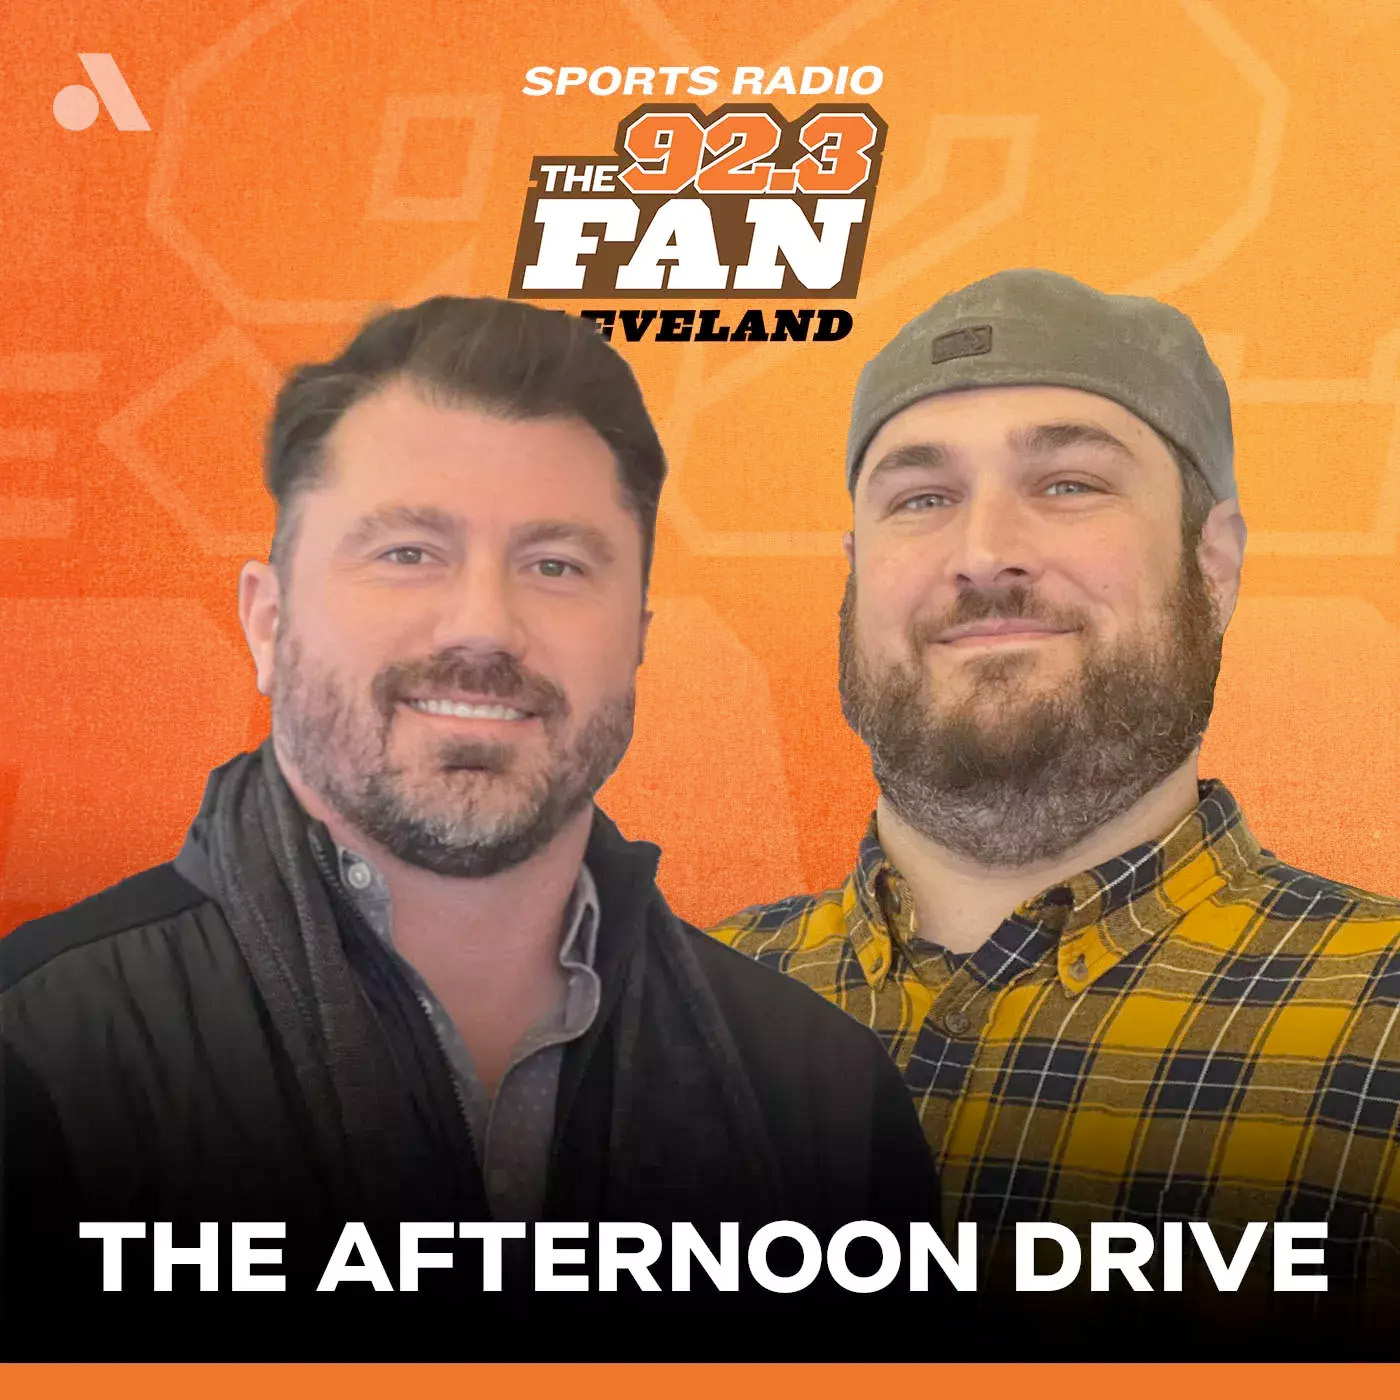 Bull & Fox with Jason Lloyd discuss Austin Hooper's comments on his role with Browns and more